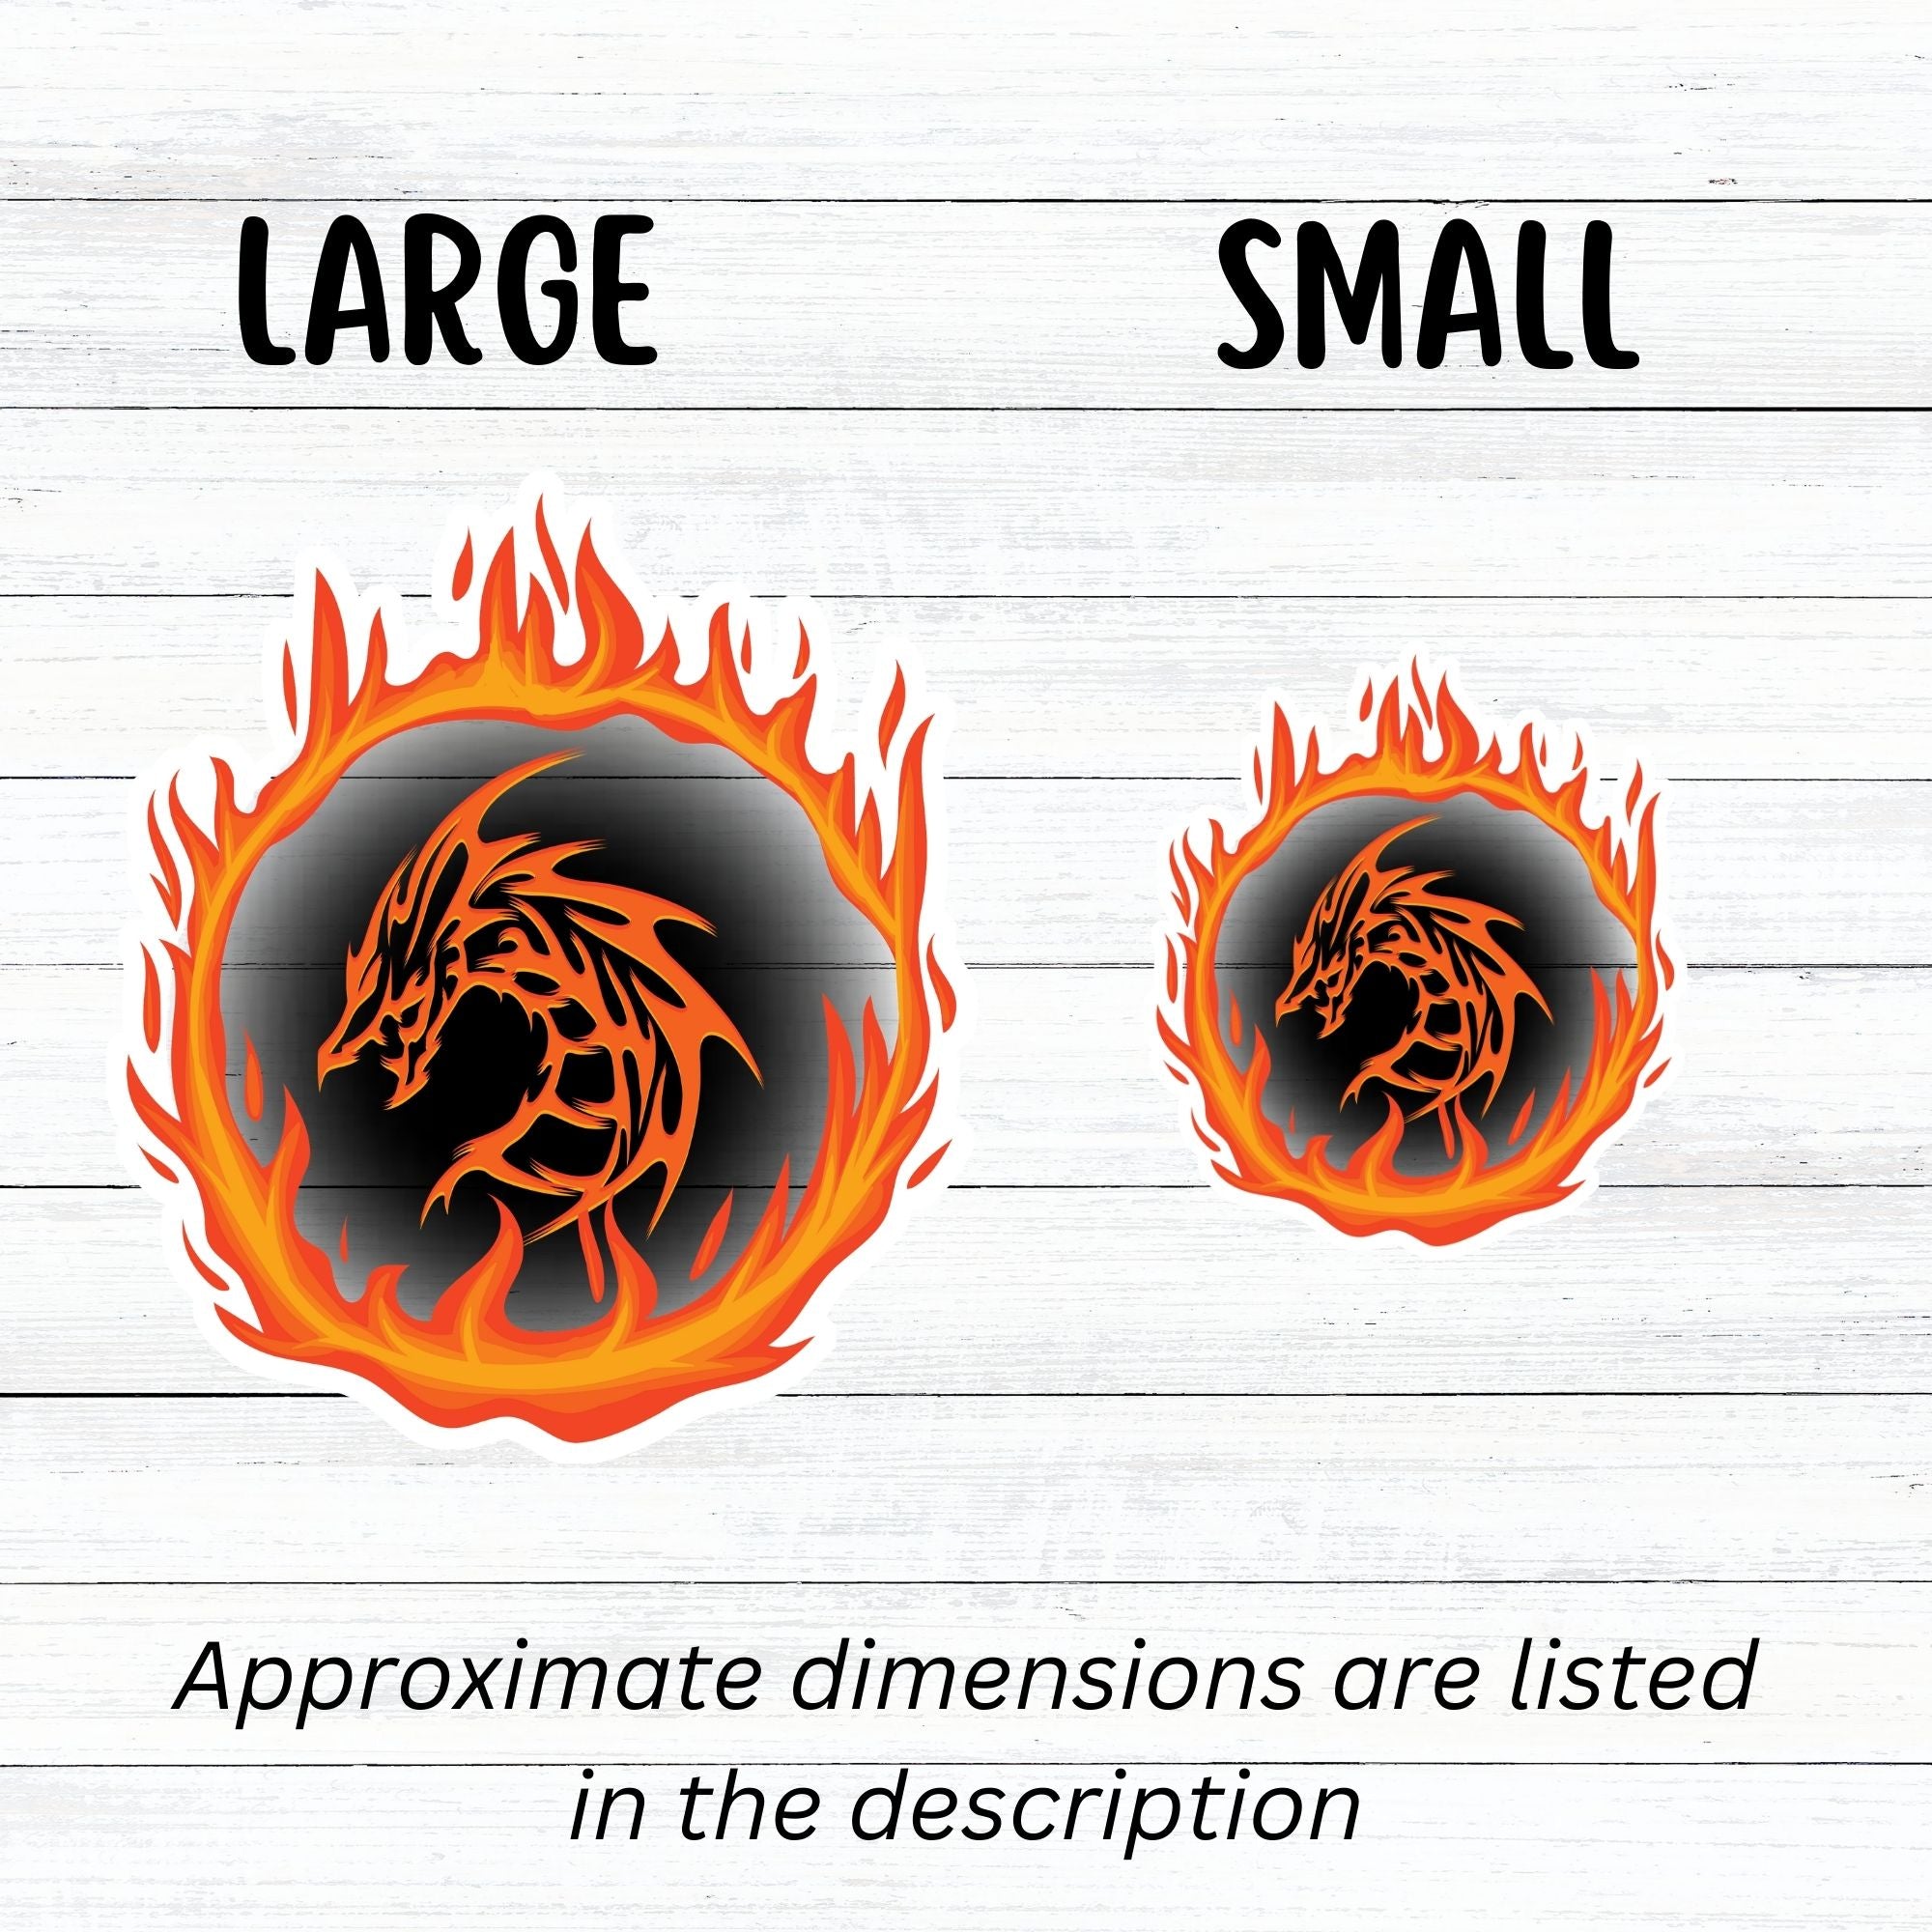 Who dares to disturb the Fire Dragon? This individual die-cut sticker features a fiery orange dragon surrounded by a ring of fire.  This image shows large and small Fire Dragon die-cut stickers next to each other.